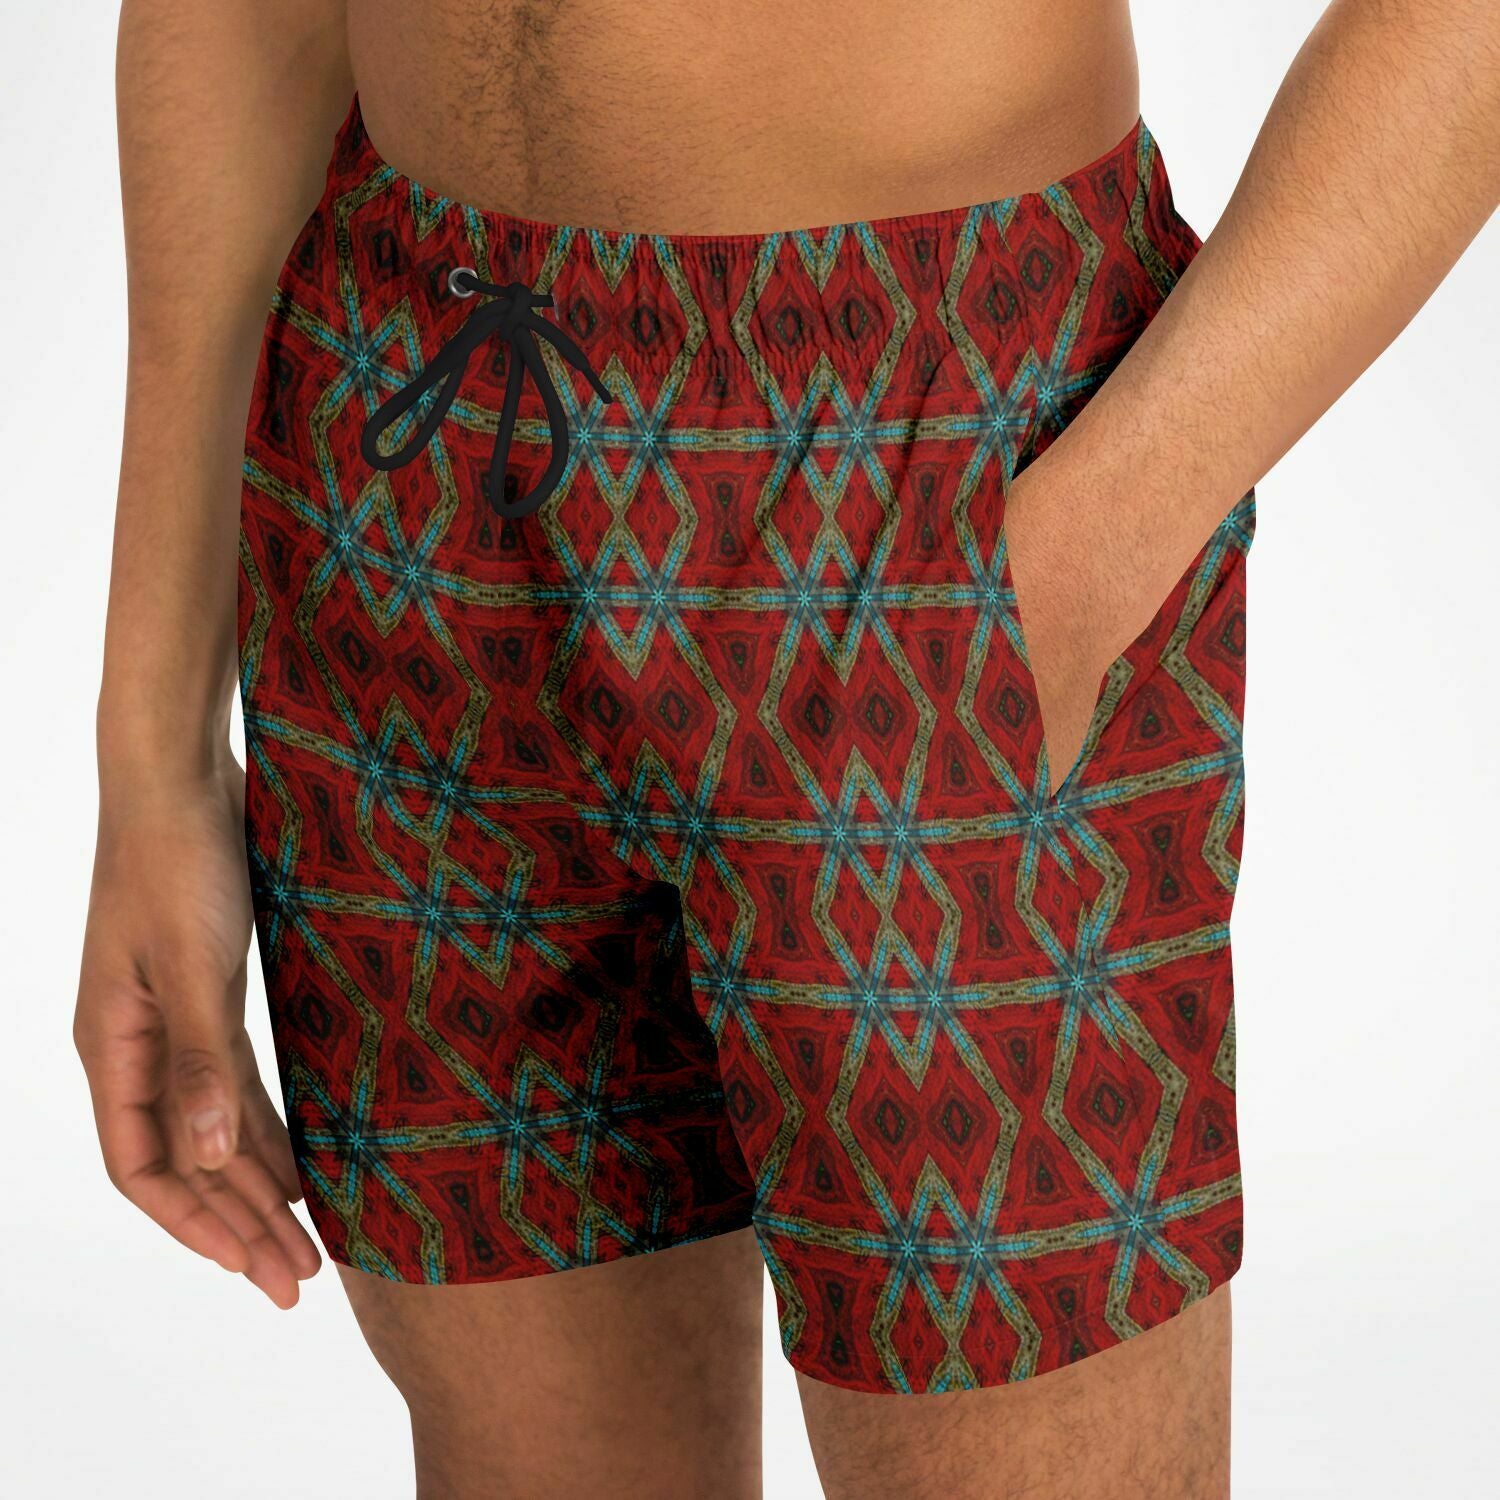 mens bathing suit with red designer print